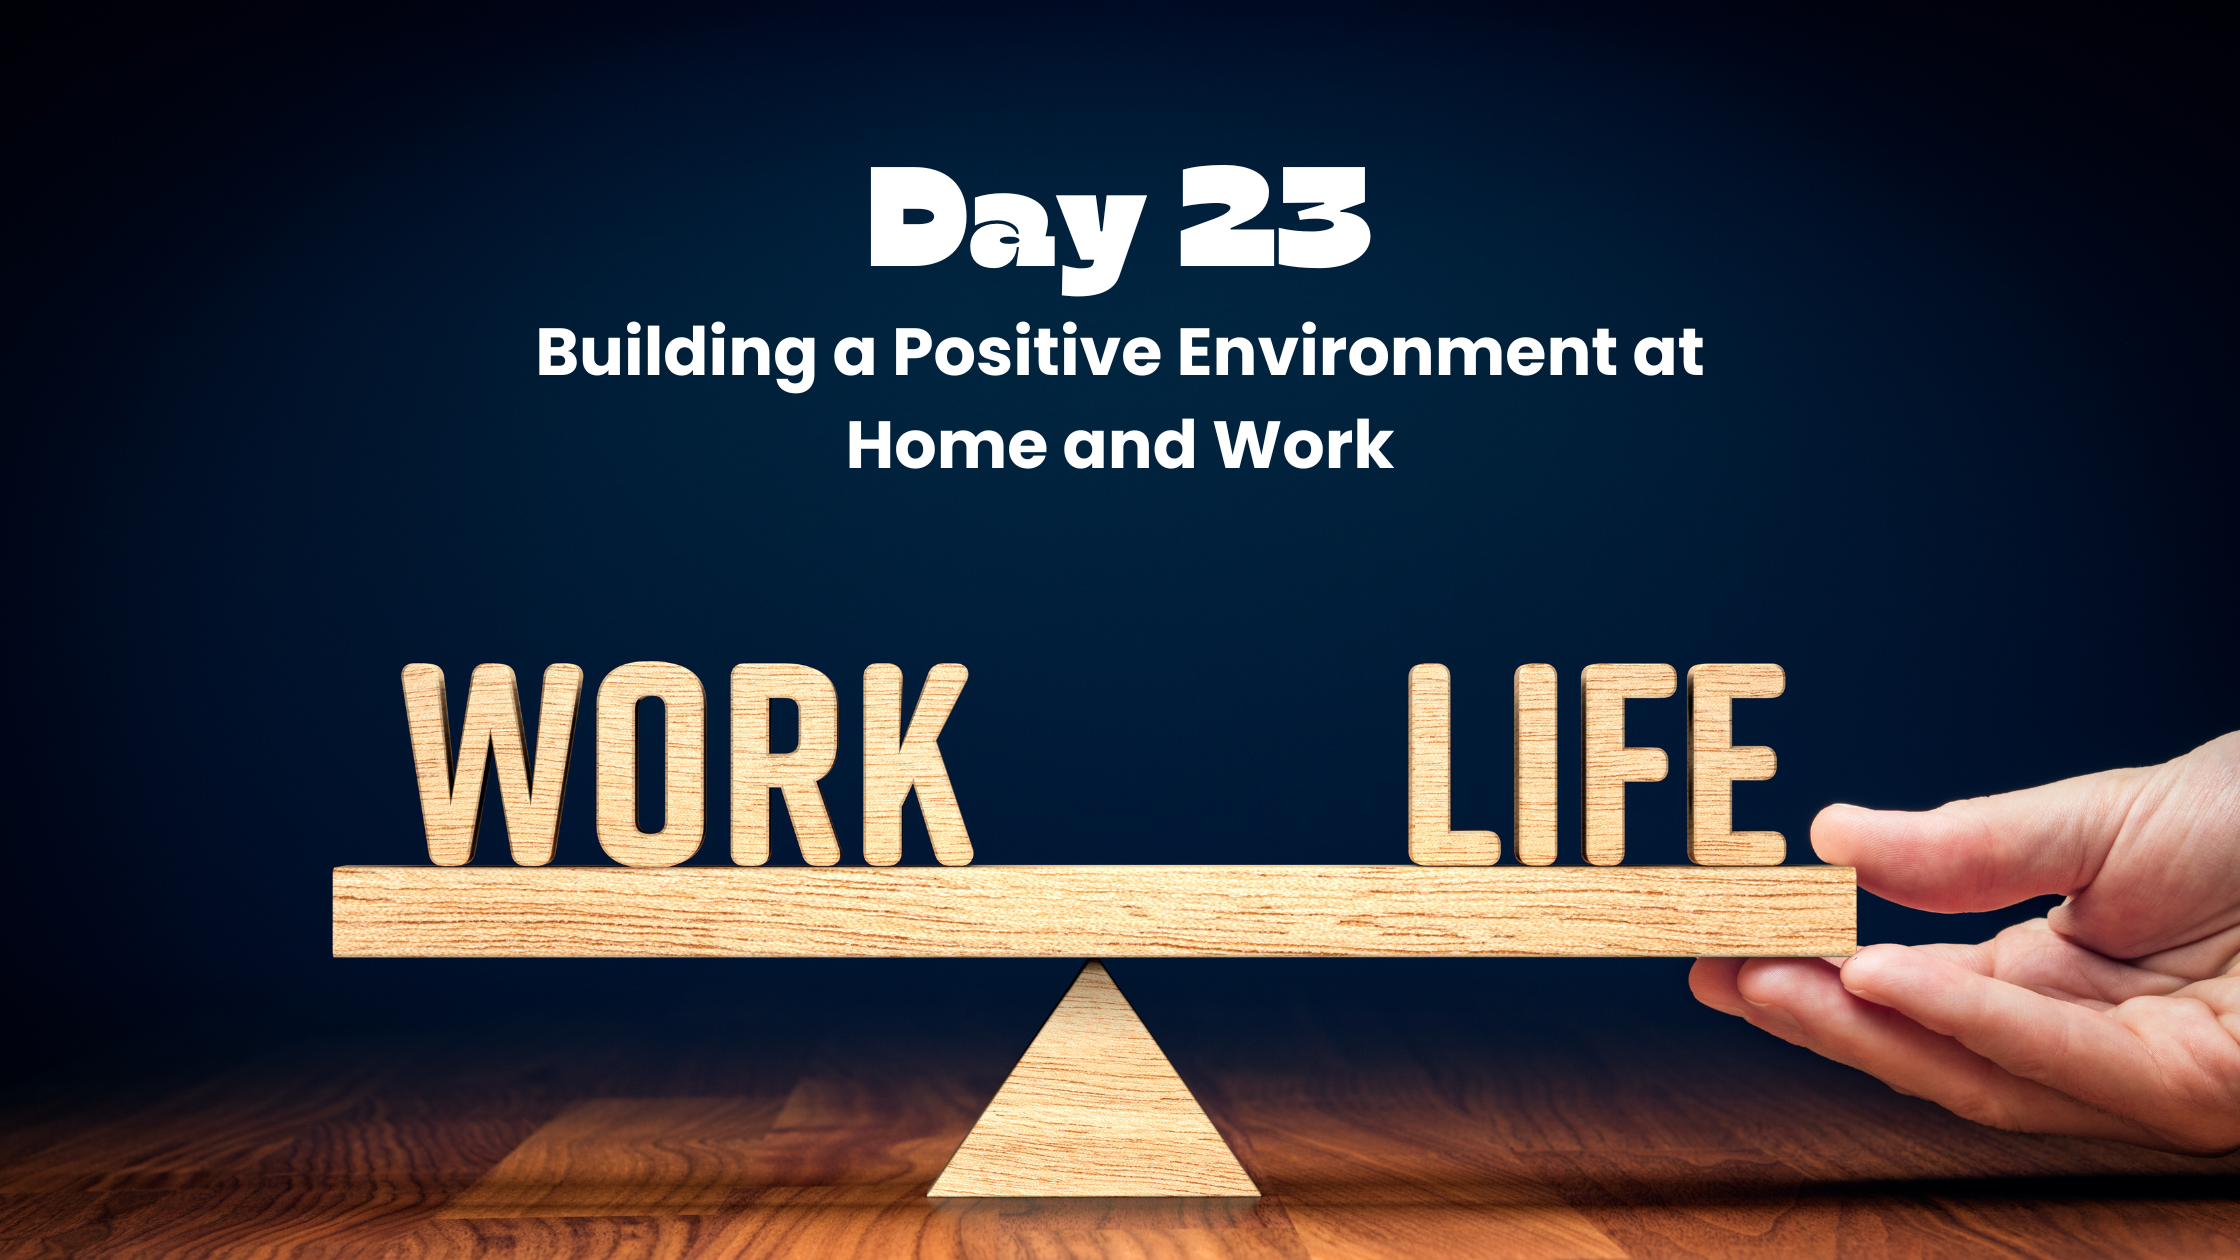 Day 23: Building a Positive Environment at Home and Work